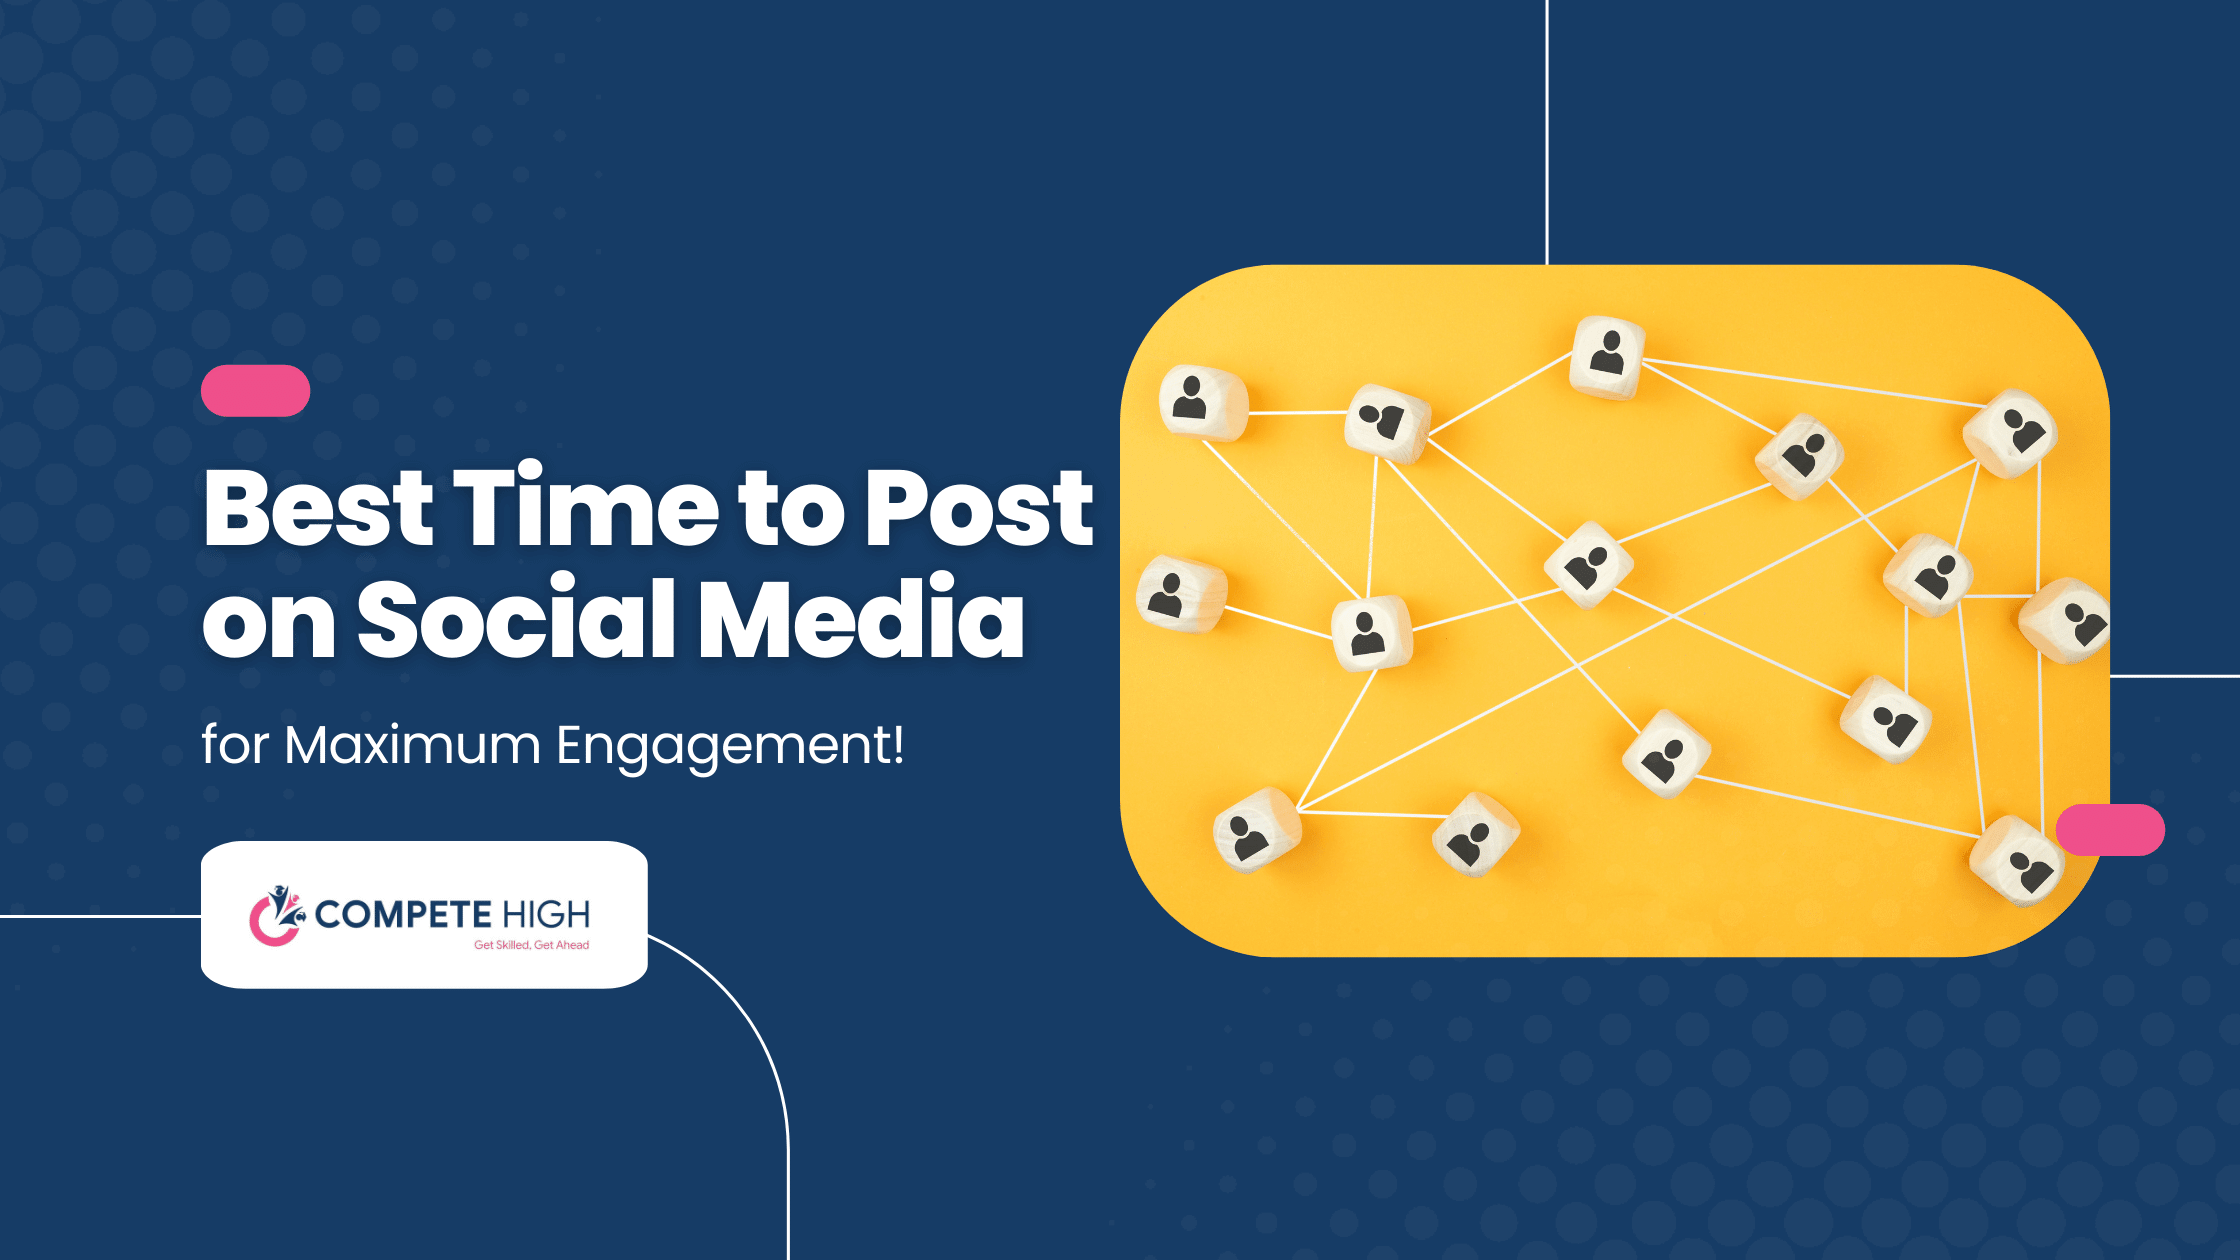 The best time to post on social media for maximum engagement